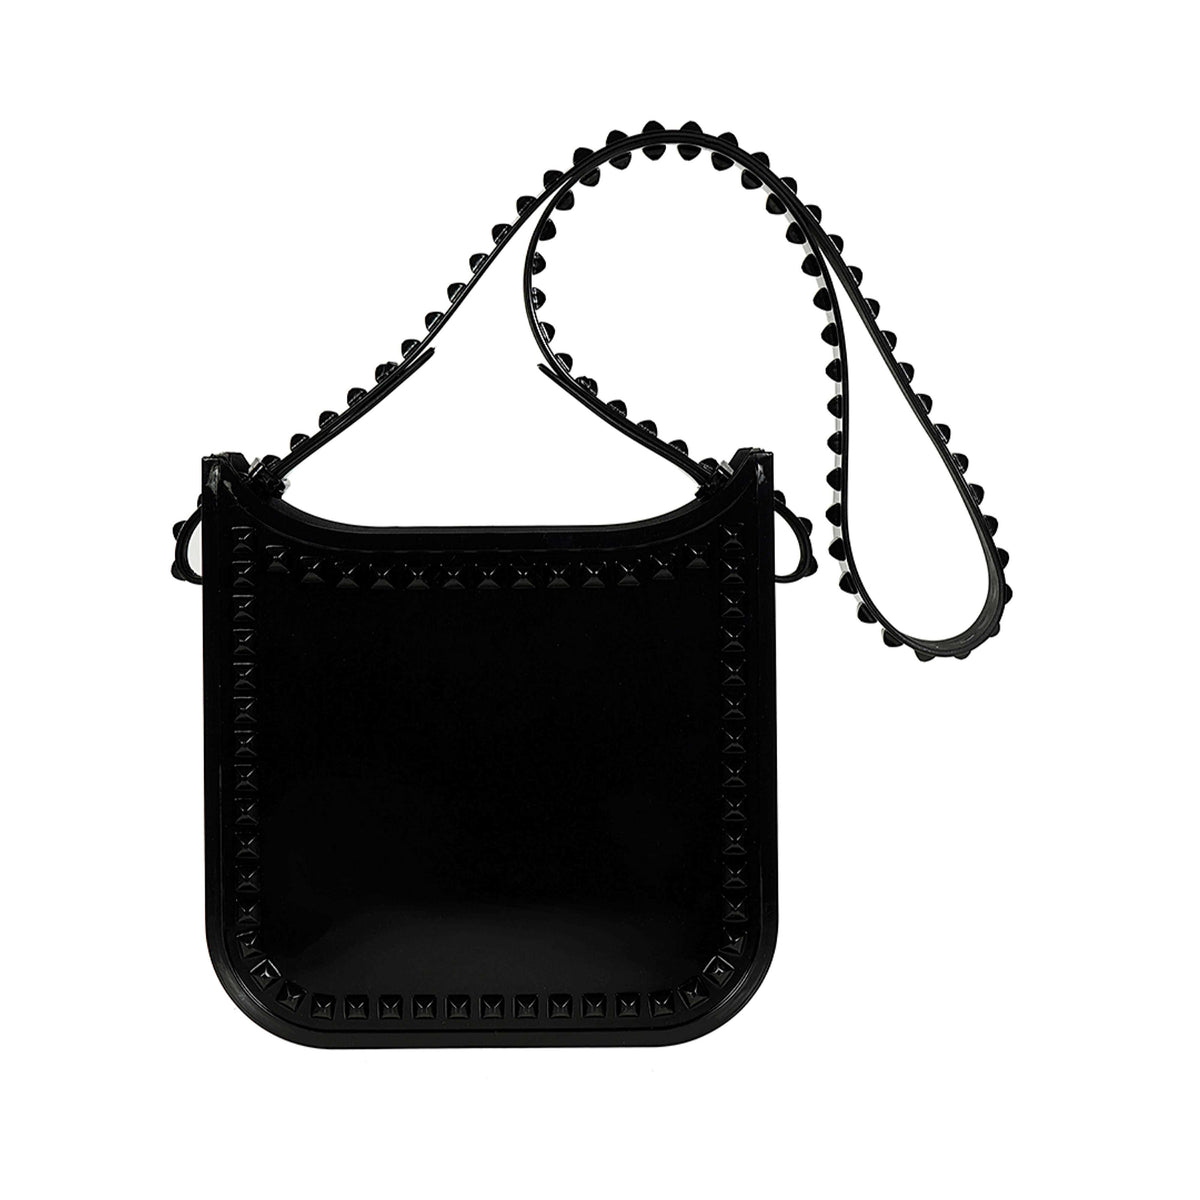 Recyclable Toni Carmen Sol jelly bags in color black